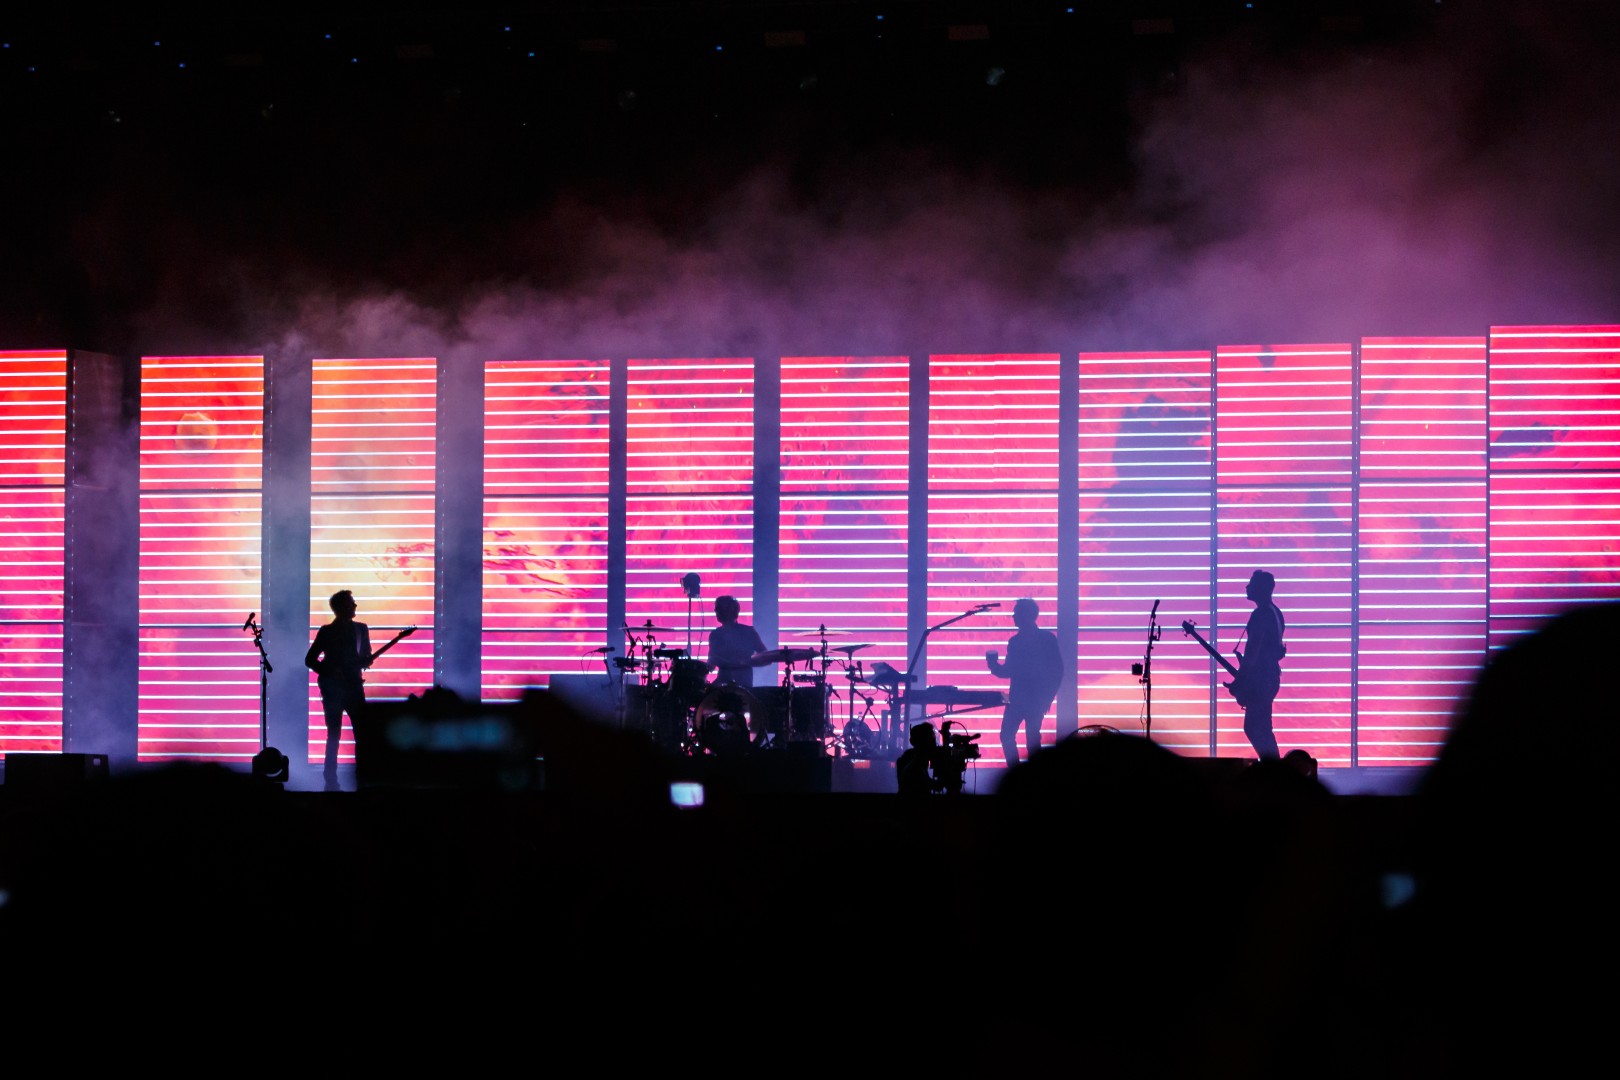 Muse at Piața Constituției in Bucharest on July 29, 2016 (811735b0a9)